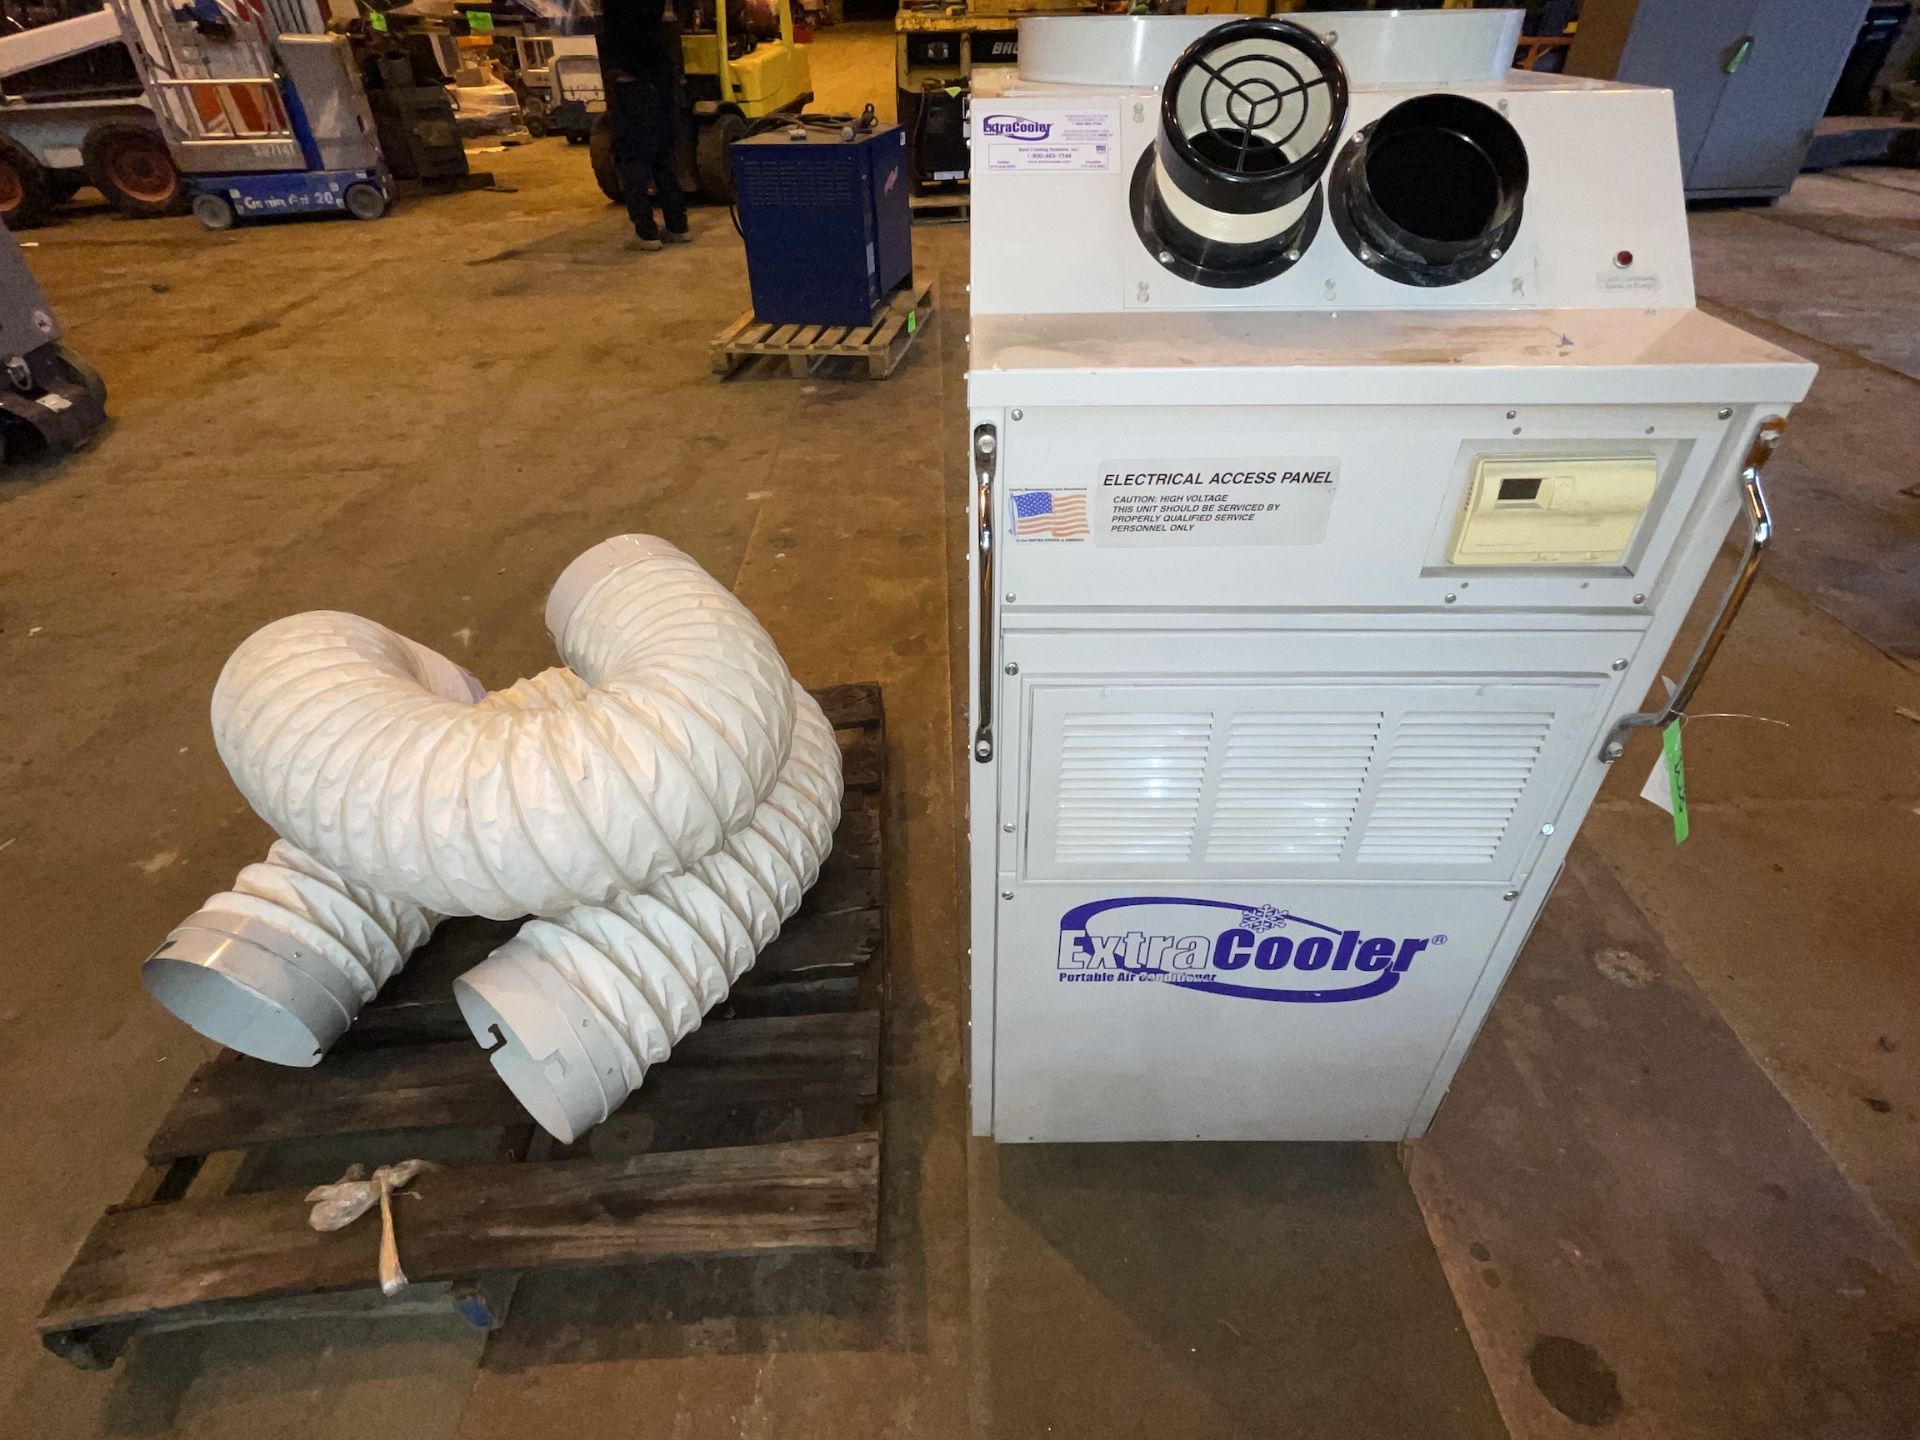 Extracooler Portable Air Condition System (BS38) - Lester, PA